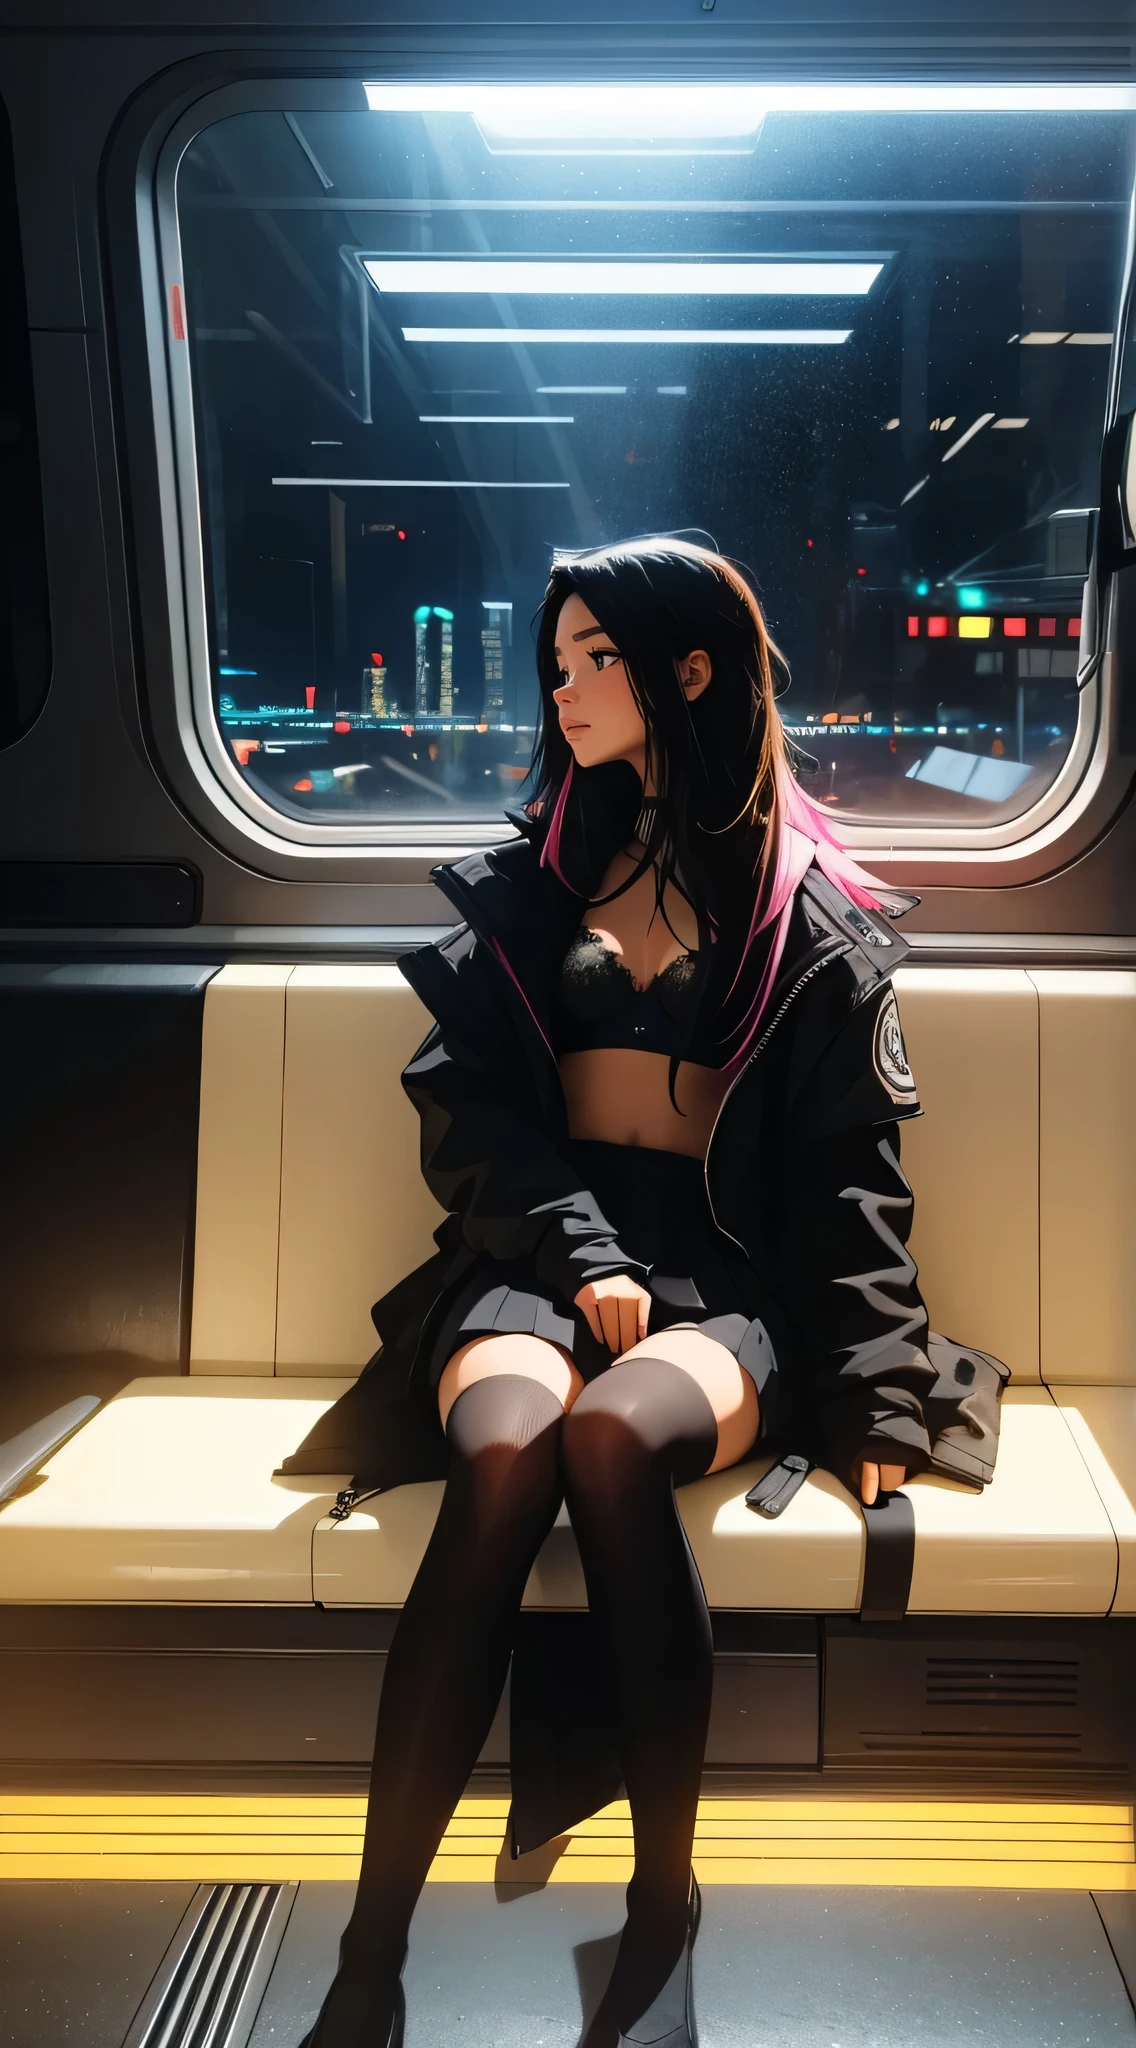 train du futur, cyberpunk,  sitting by the window,  pose pensives, Looking dreamily off in the distance, 
Landscape passing by at high speed, voyage de nuit, beautiful starry sky, Une belle fille avec, 
UHD Portrait, (High quality) (ultra details) Spectator in tenue de ville hip-hop style. open jacket, bra, short skirt, over the knee socks, striped; different, colourfull, colored  long hair 🌈
Back light. light through hair, low key lighting, deep shadows, dark scene. spotlight on face